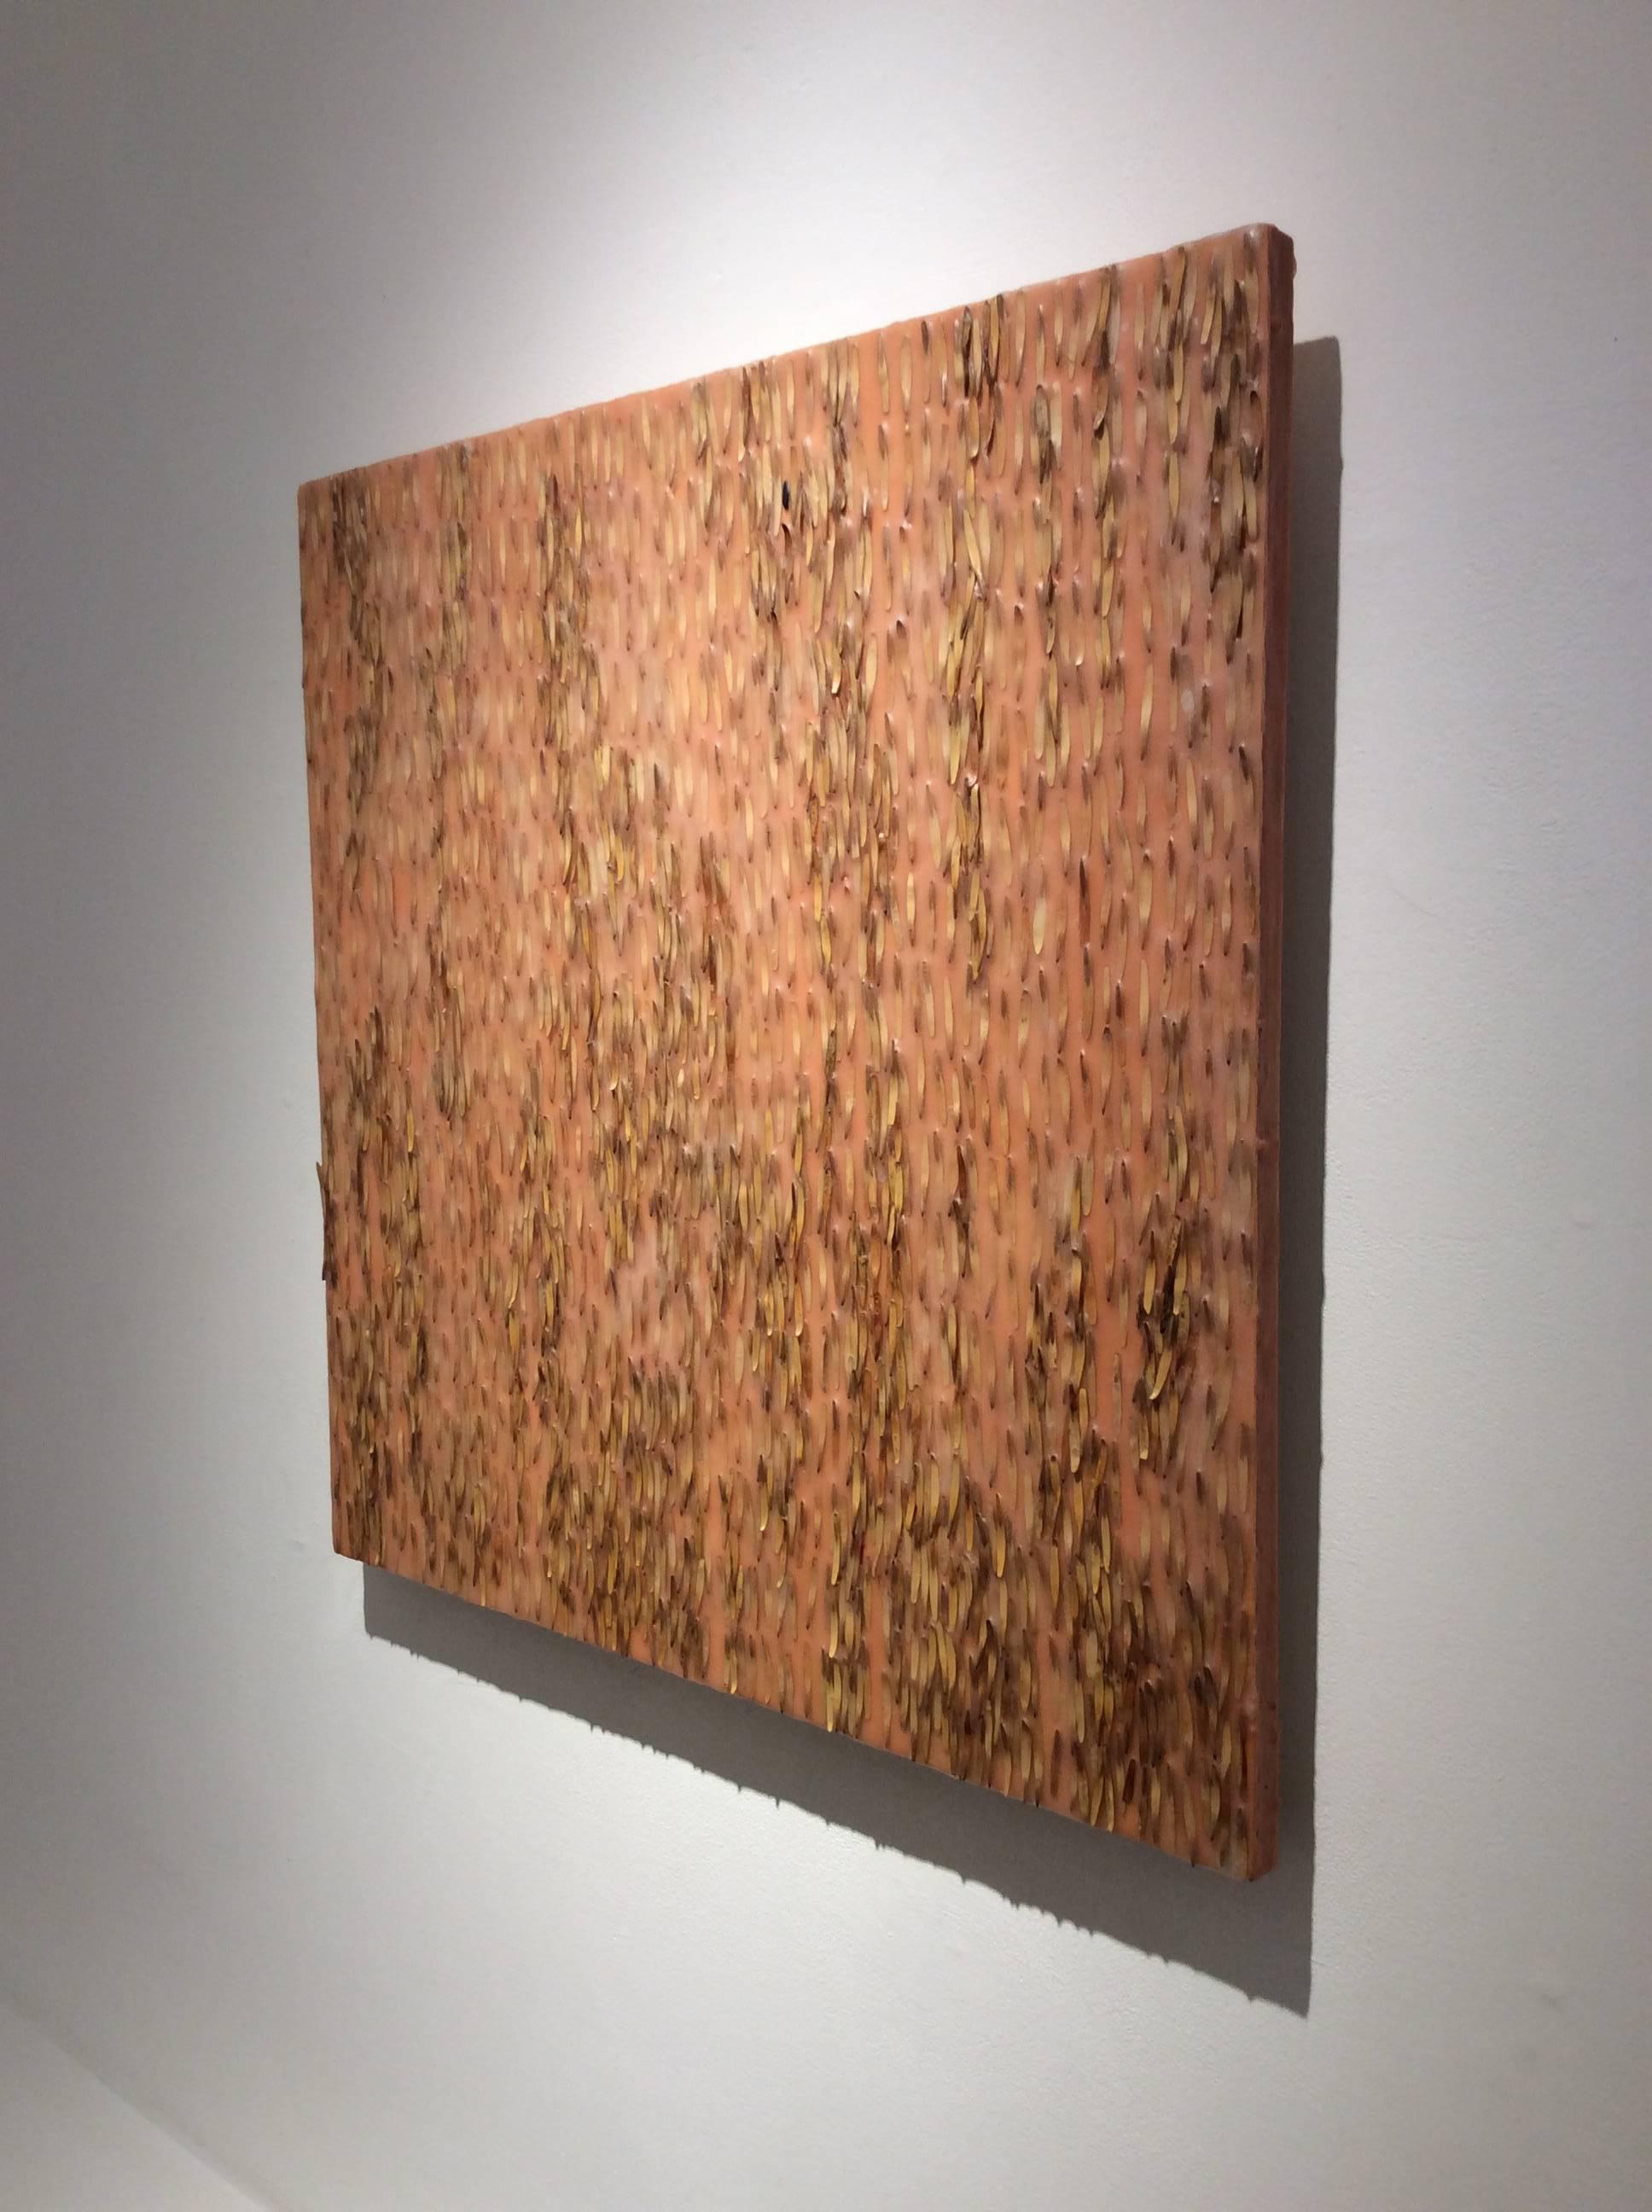 Abstract encaustic painting with dark brown and beige ash keys against a light orange, peach background
24 x 24 x 1.5 inches 

This modern abstract encaustic painting by Allyson Levy is made with assorted beige and light brown ash keys encased in a